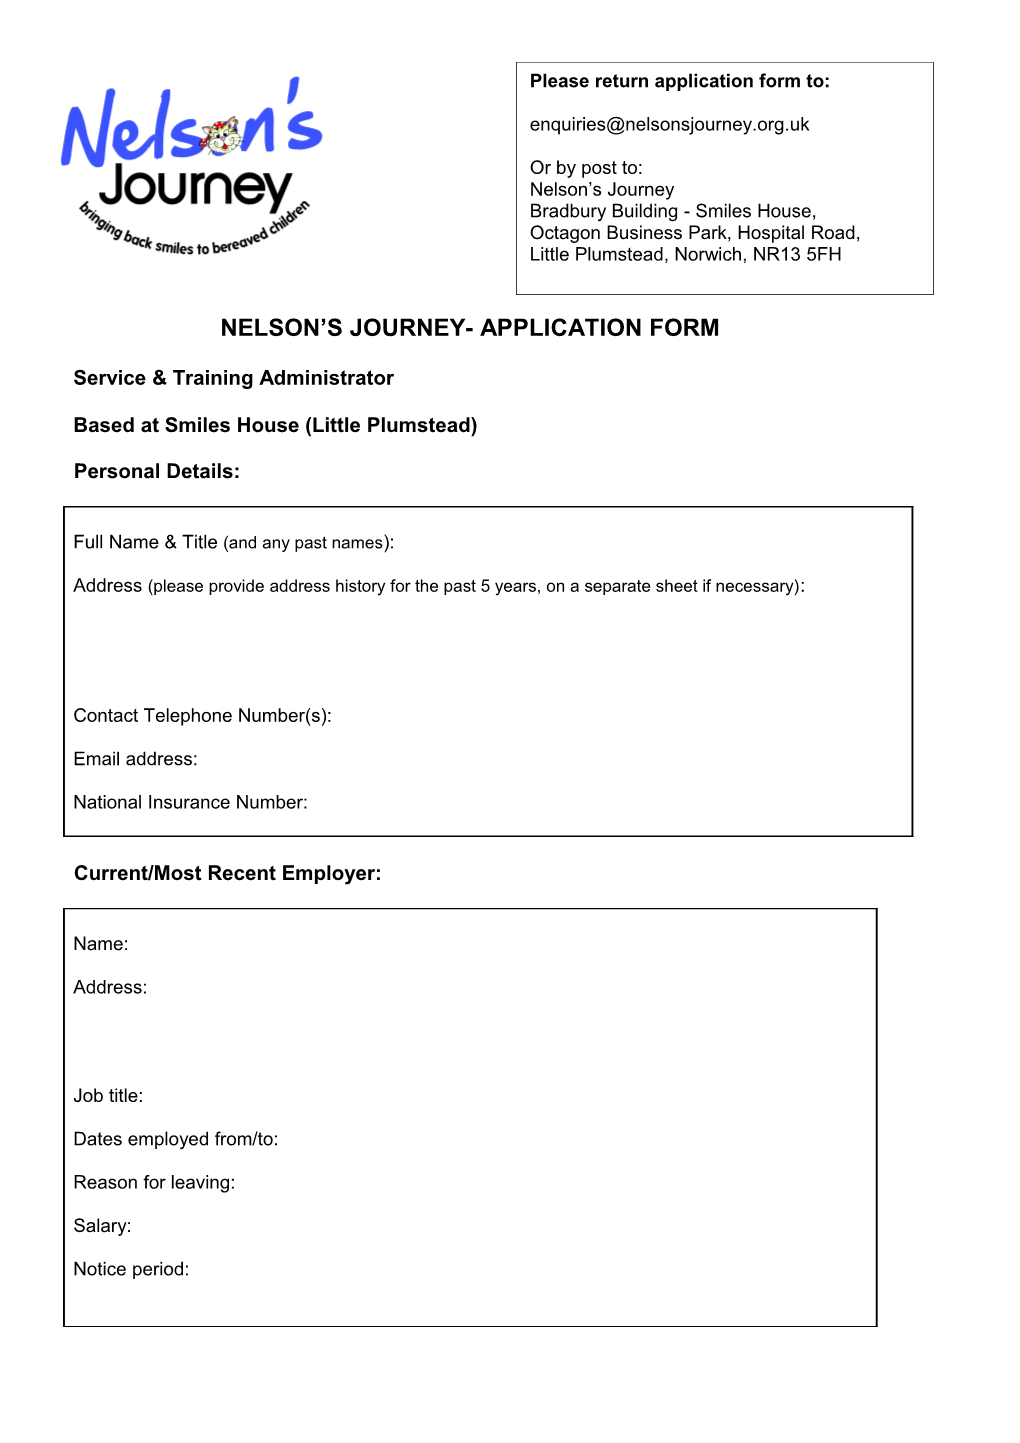 Nelson S Journey- Application Form